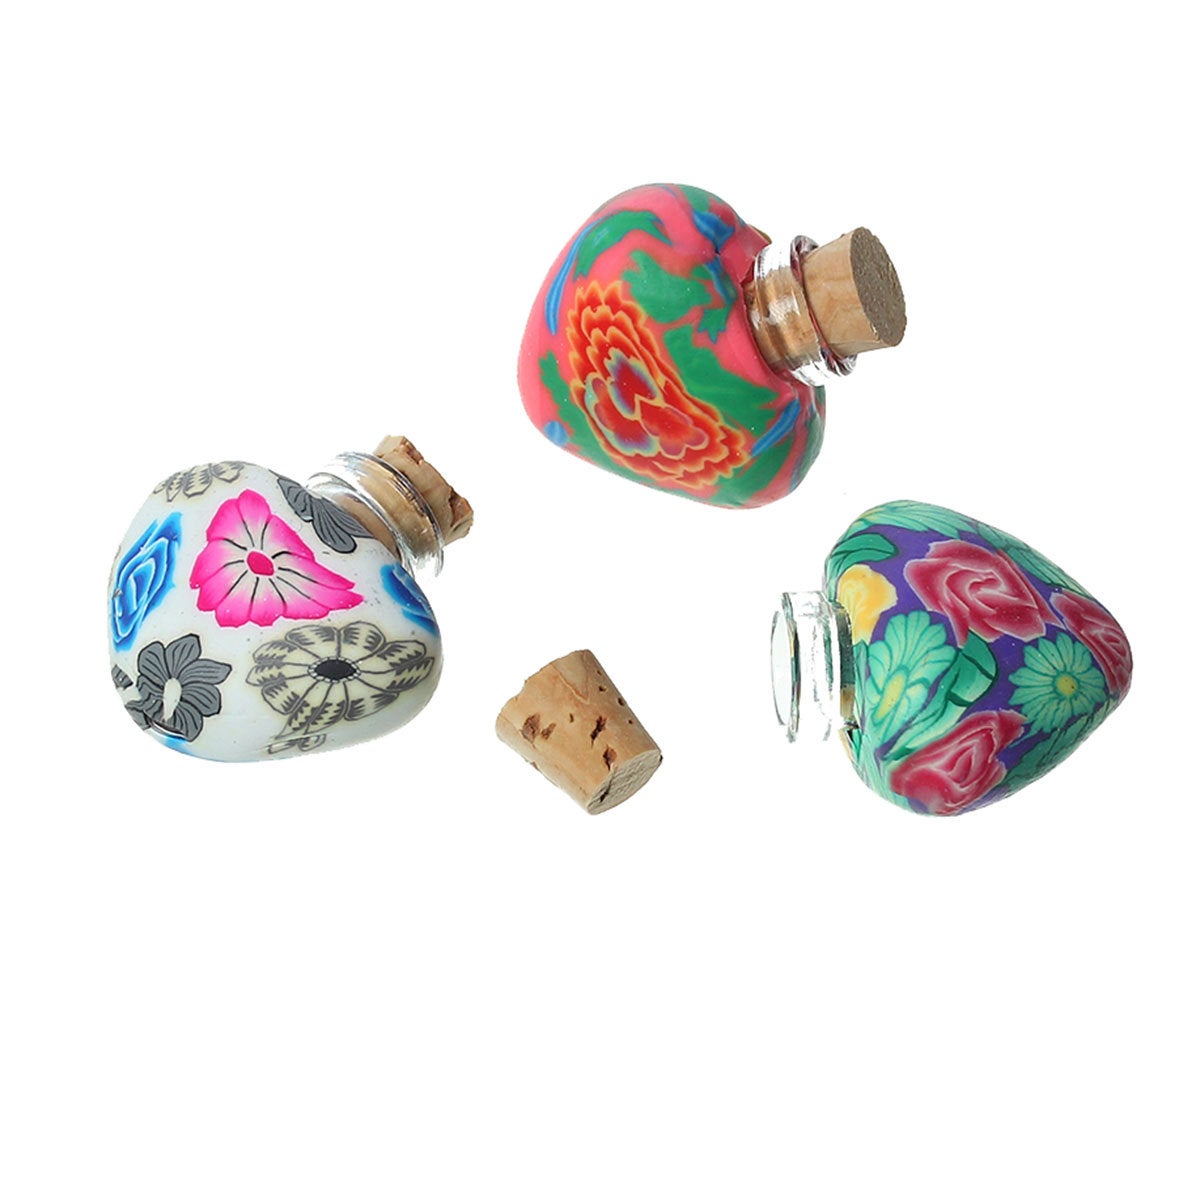 CLEARANCE!!! - 3pcs Heart shaped Polymer Clay & Glass Bottles Jewelry Vials Cork Stoppers At Random Flower